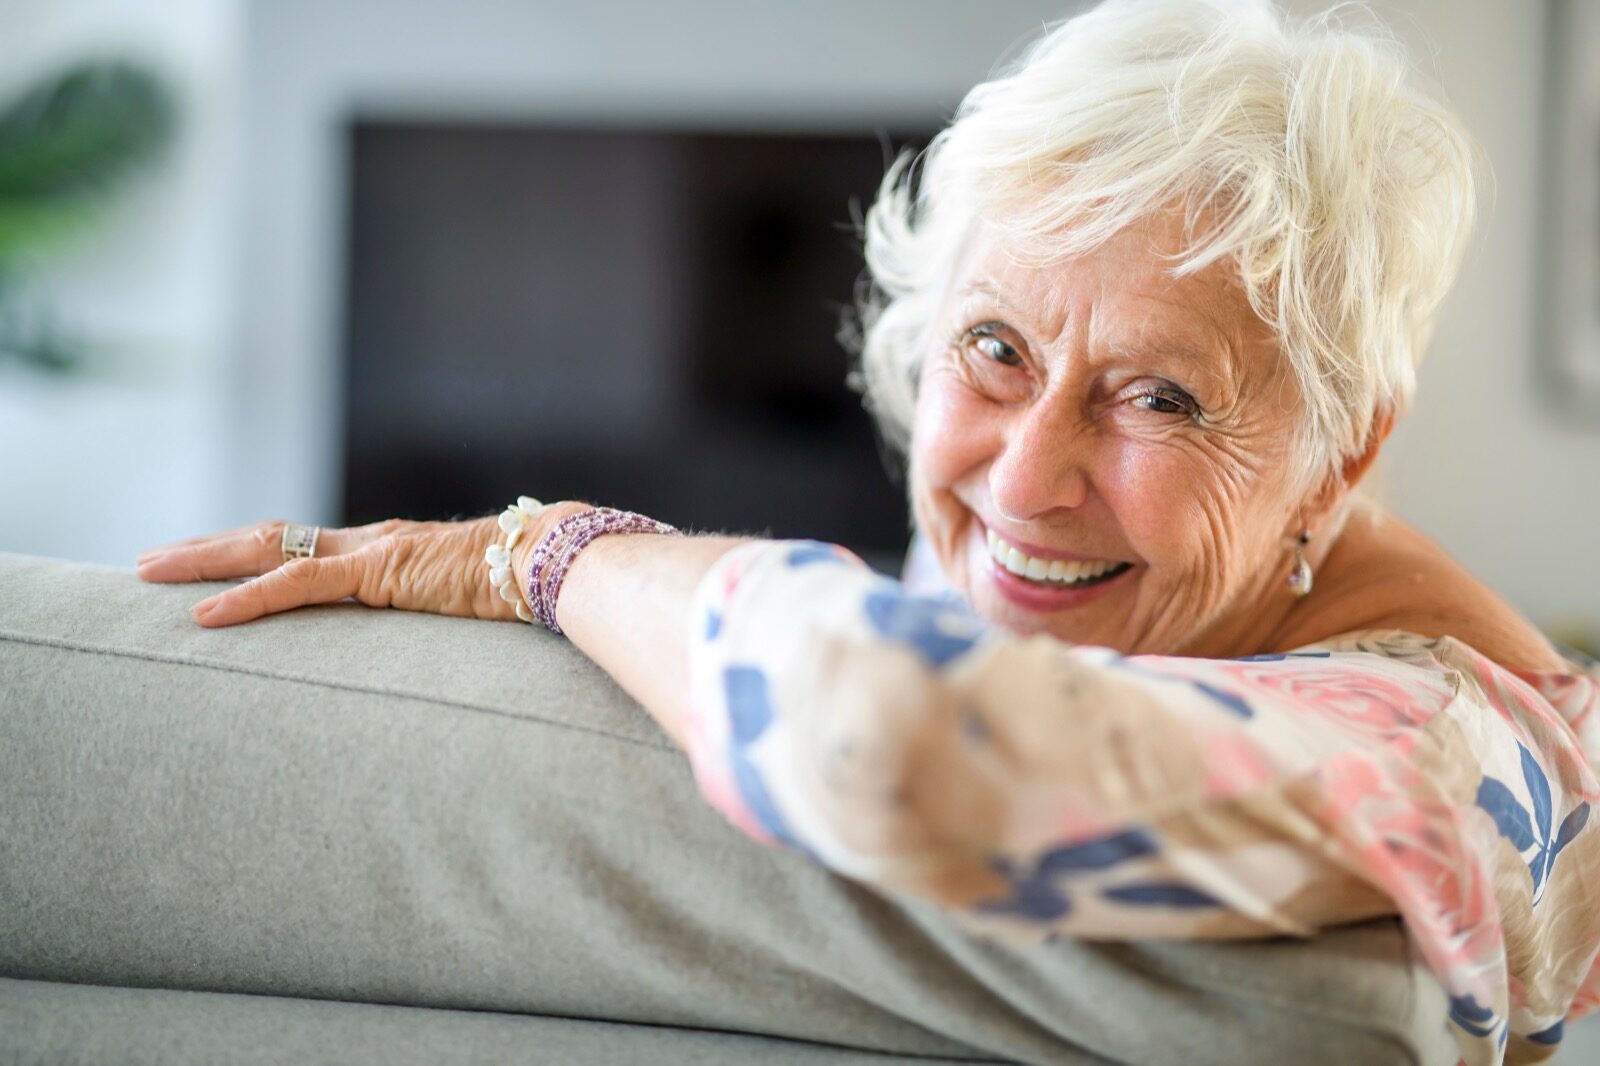 Elderly lady sitting on couch and smiling